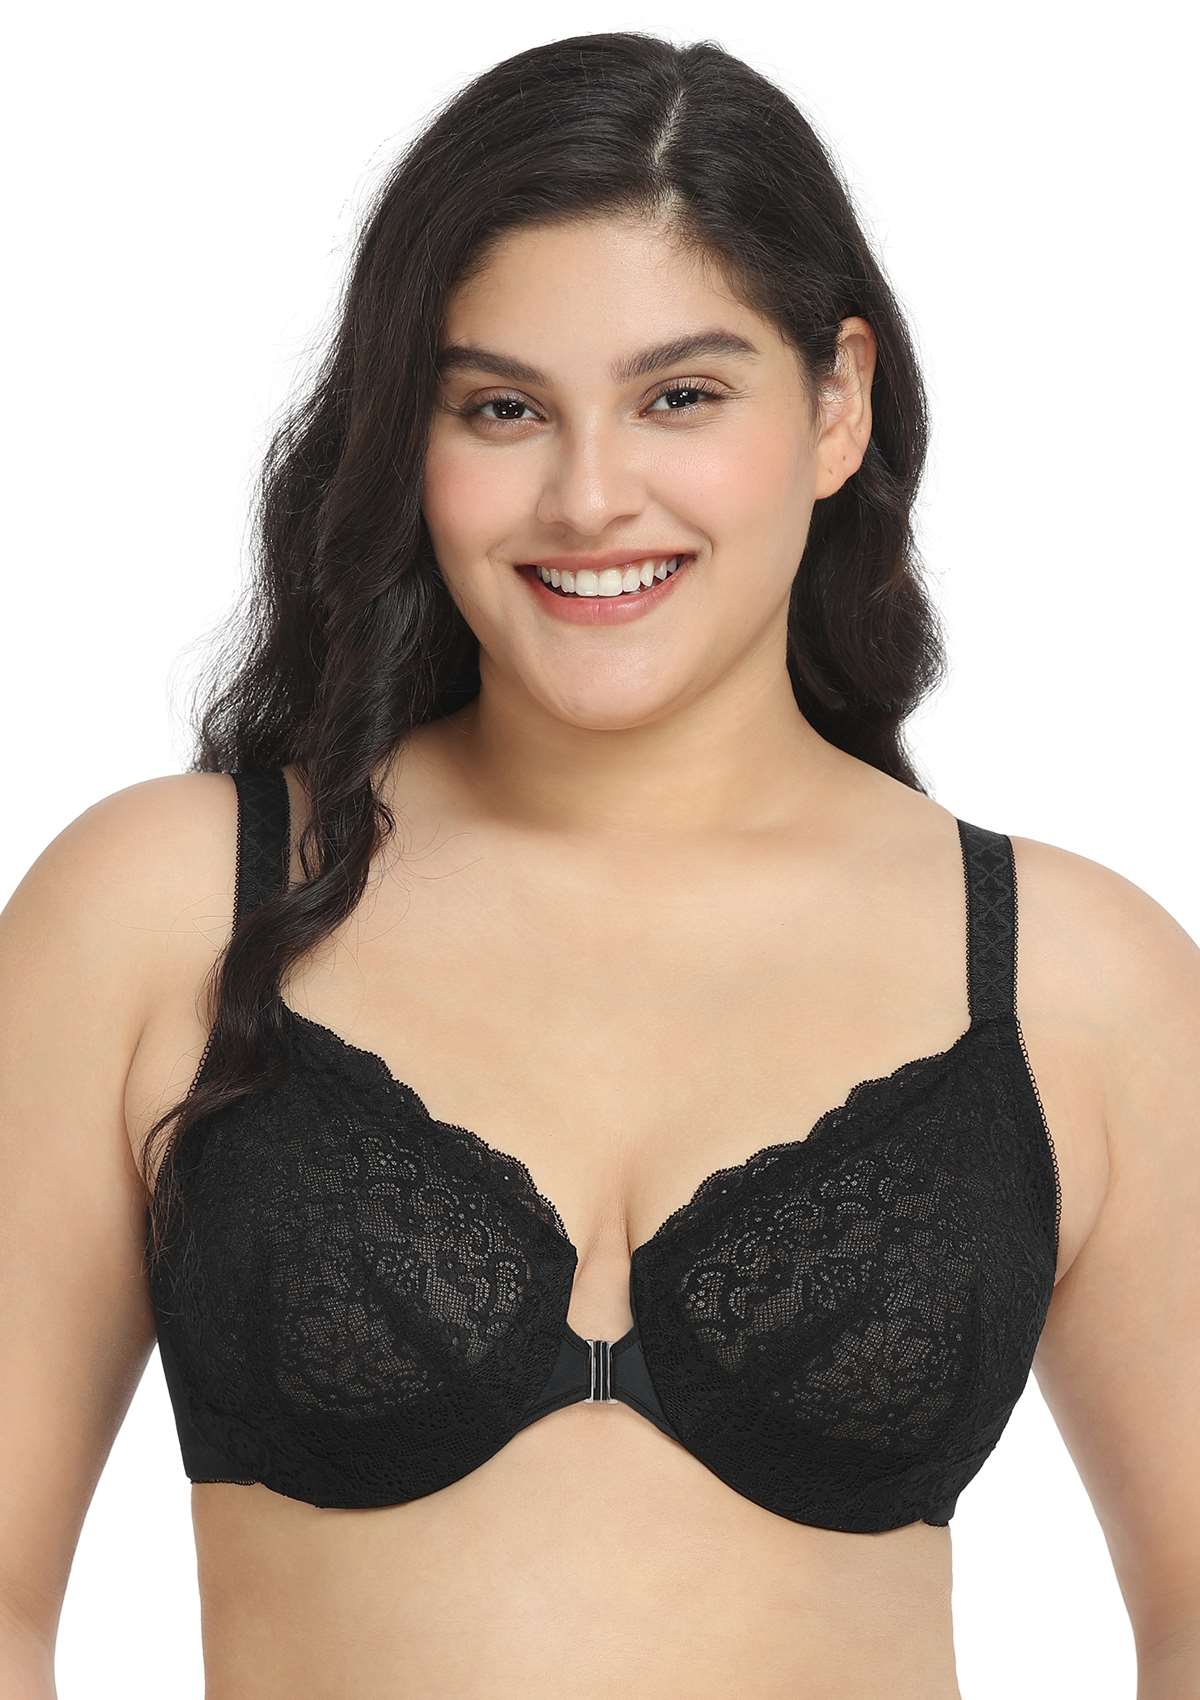 HSIA Nymphaea Front-Close Unlined Retro Floral Lace Back Smoothing Bra - Black / 42 / G